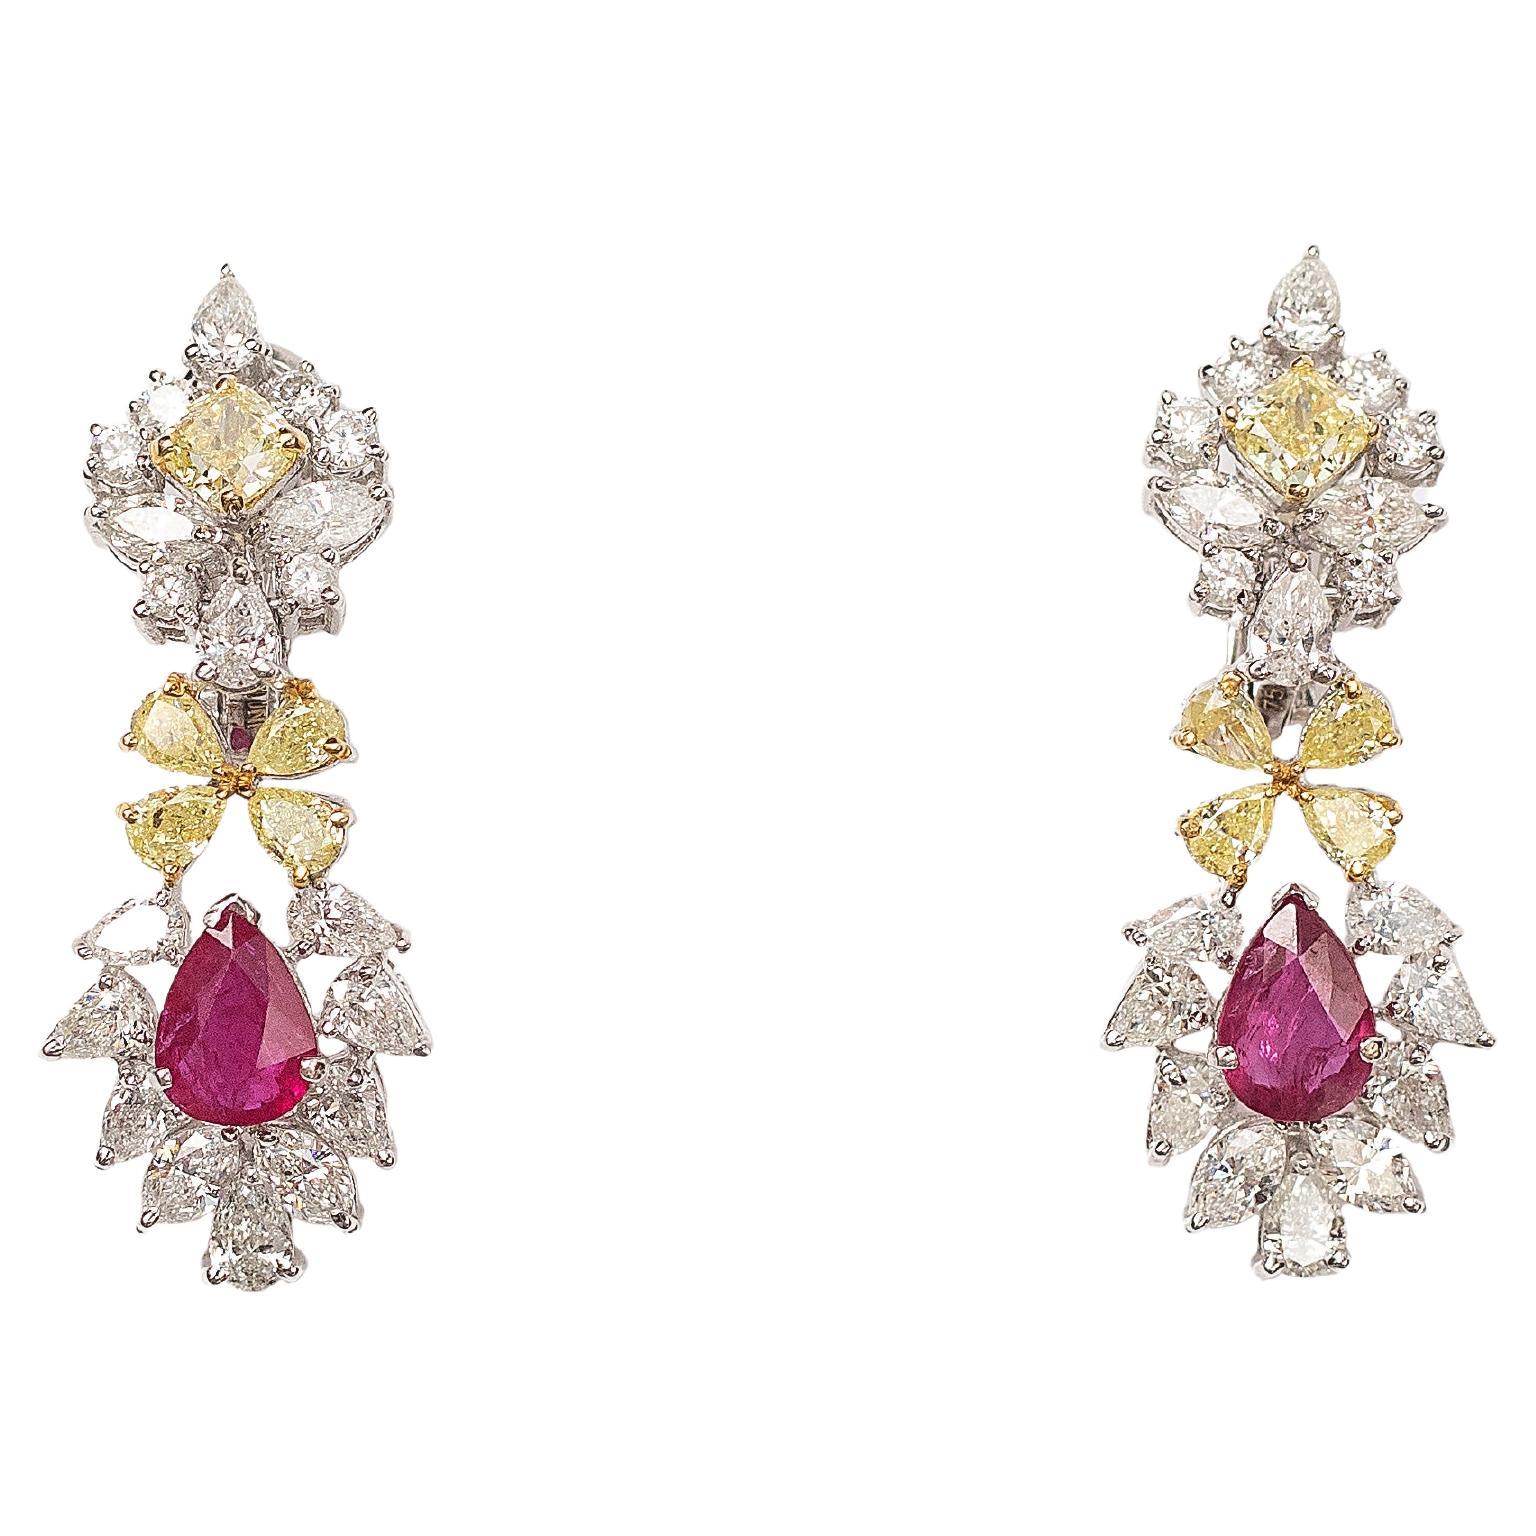 9.89 cts Fancy Yellow and White Diamonds and Natural Ruby Earrings in 18K Gold